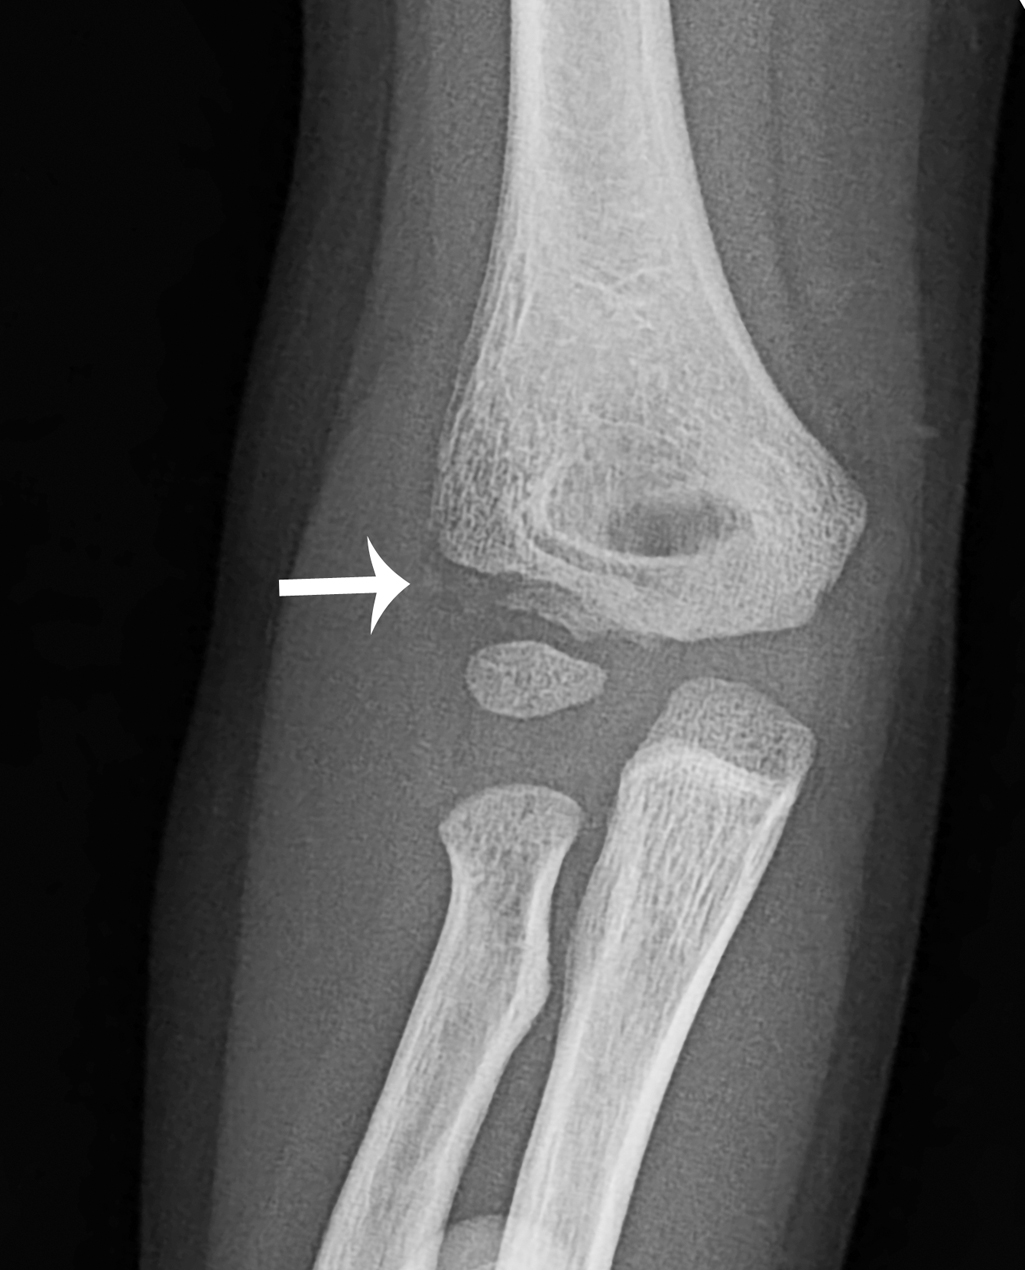 lateral condyle fx humerus closed